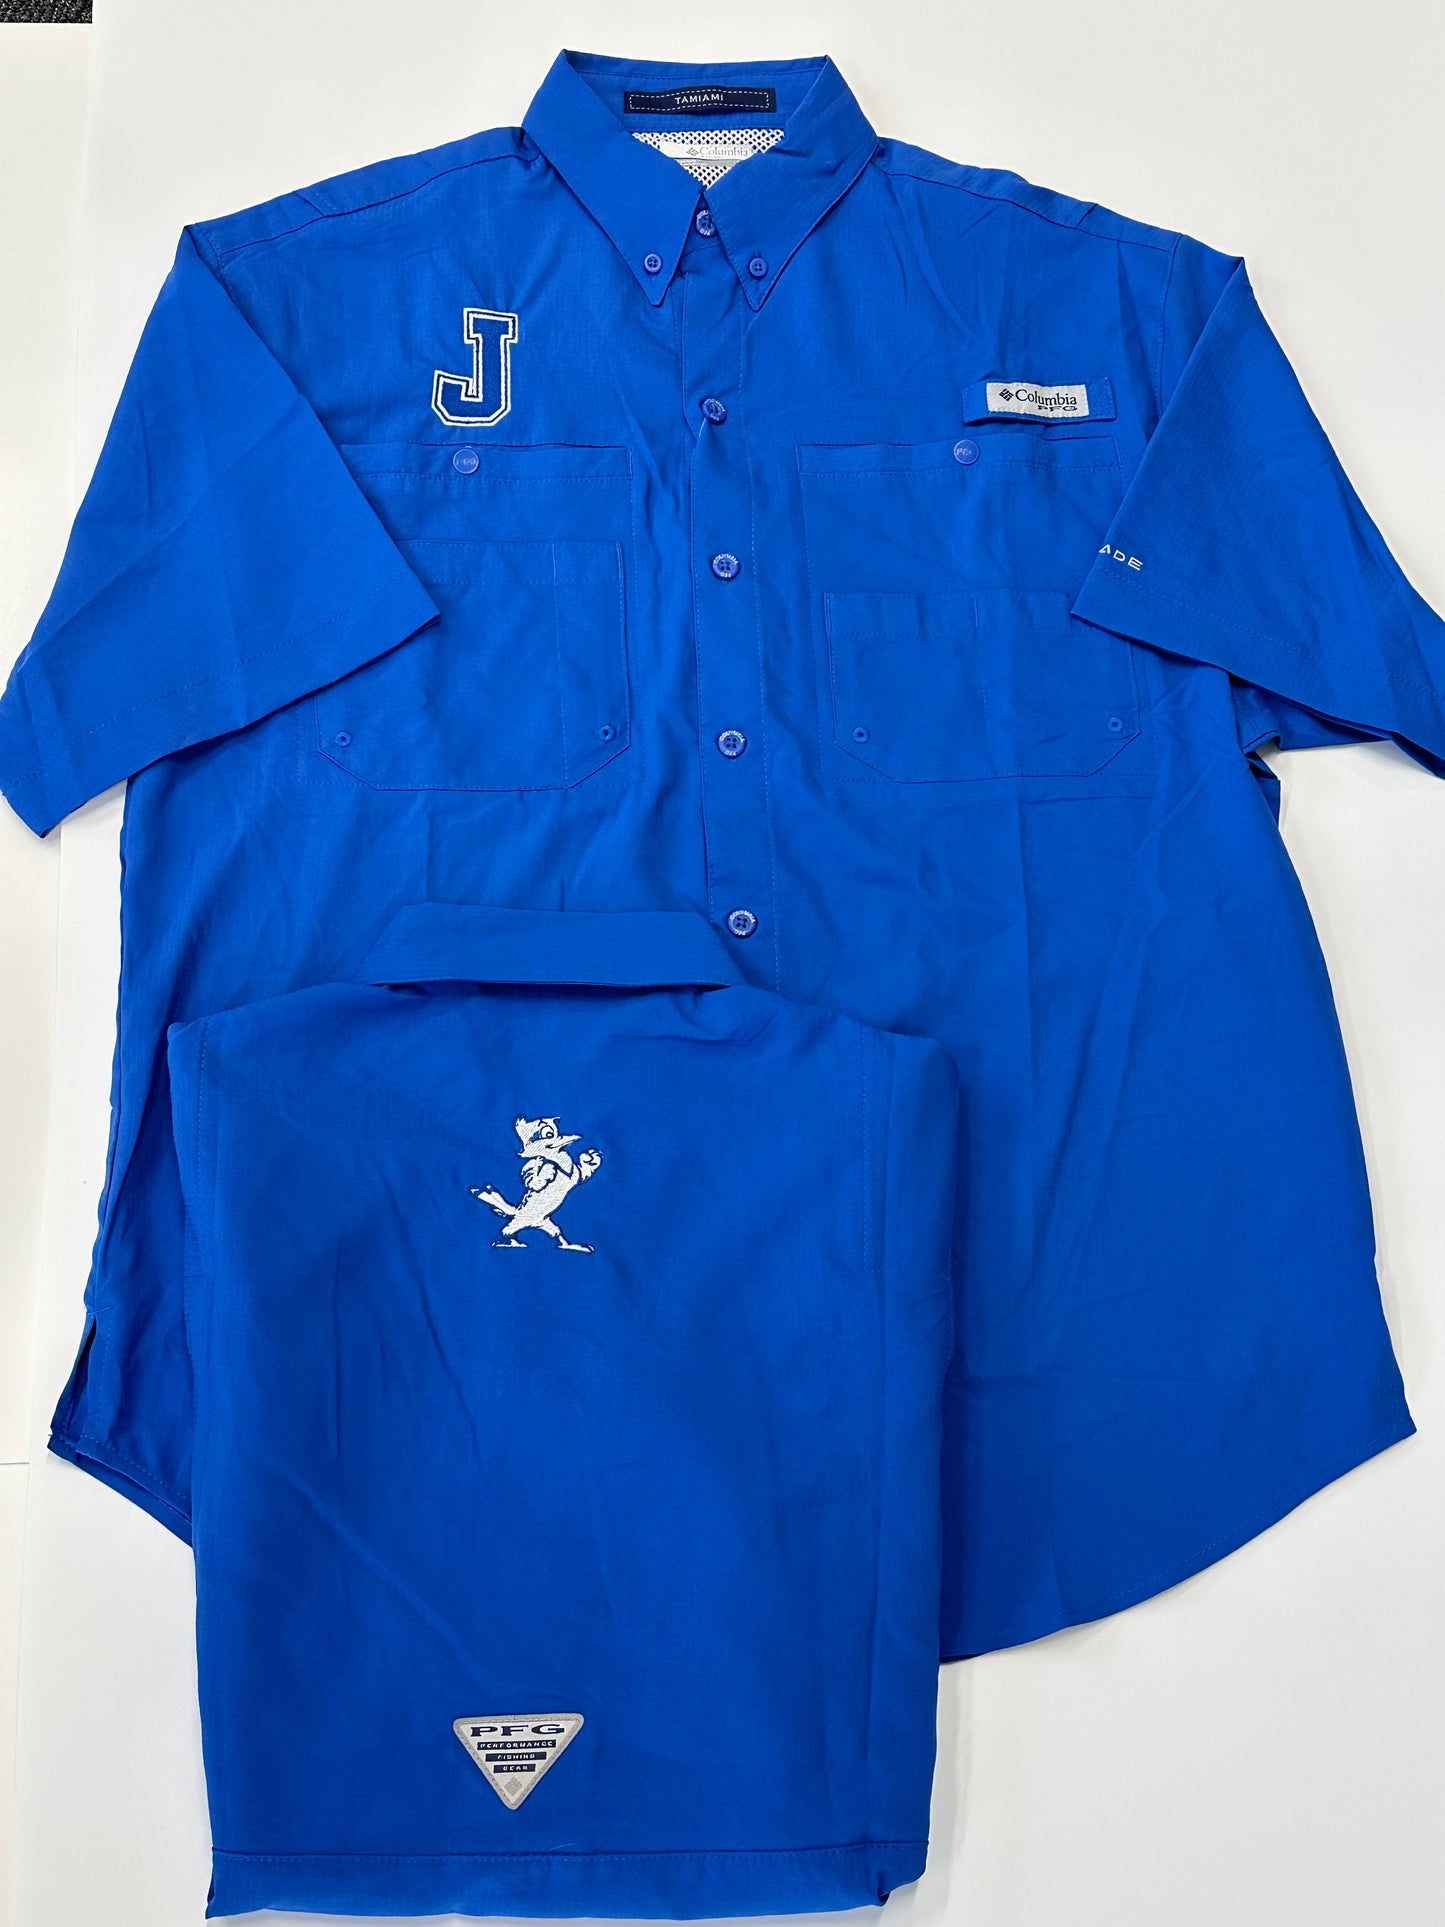 Columbia.  Omni-WICK™ Omni-SHADE™ UPF 40 sun protection Vented Quick dry Rod Holder  FABRIC Shell: 100% Polyester ripstop100% Polyester.  J embroidered logo on front with Jayson embroidered logo on center back.